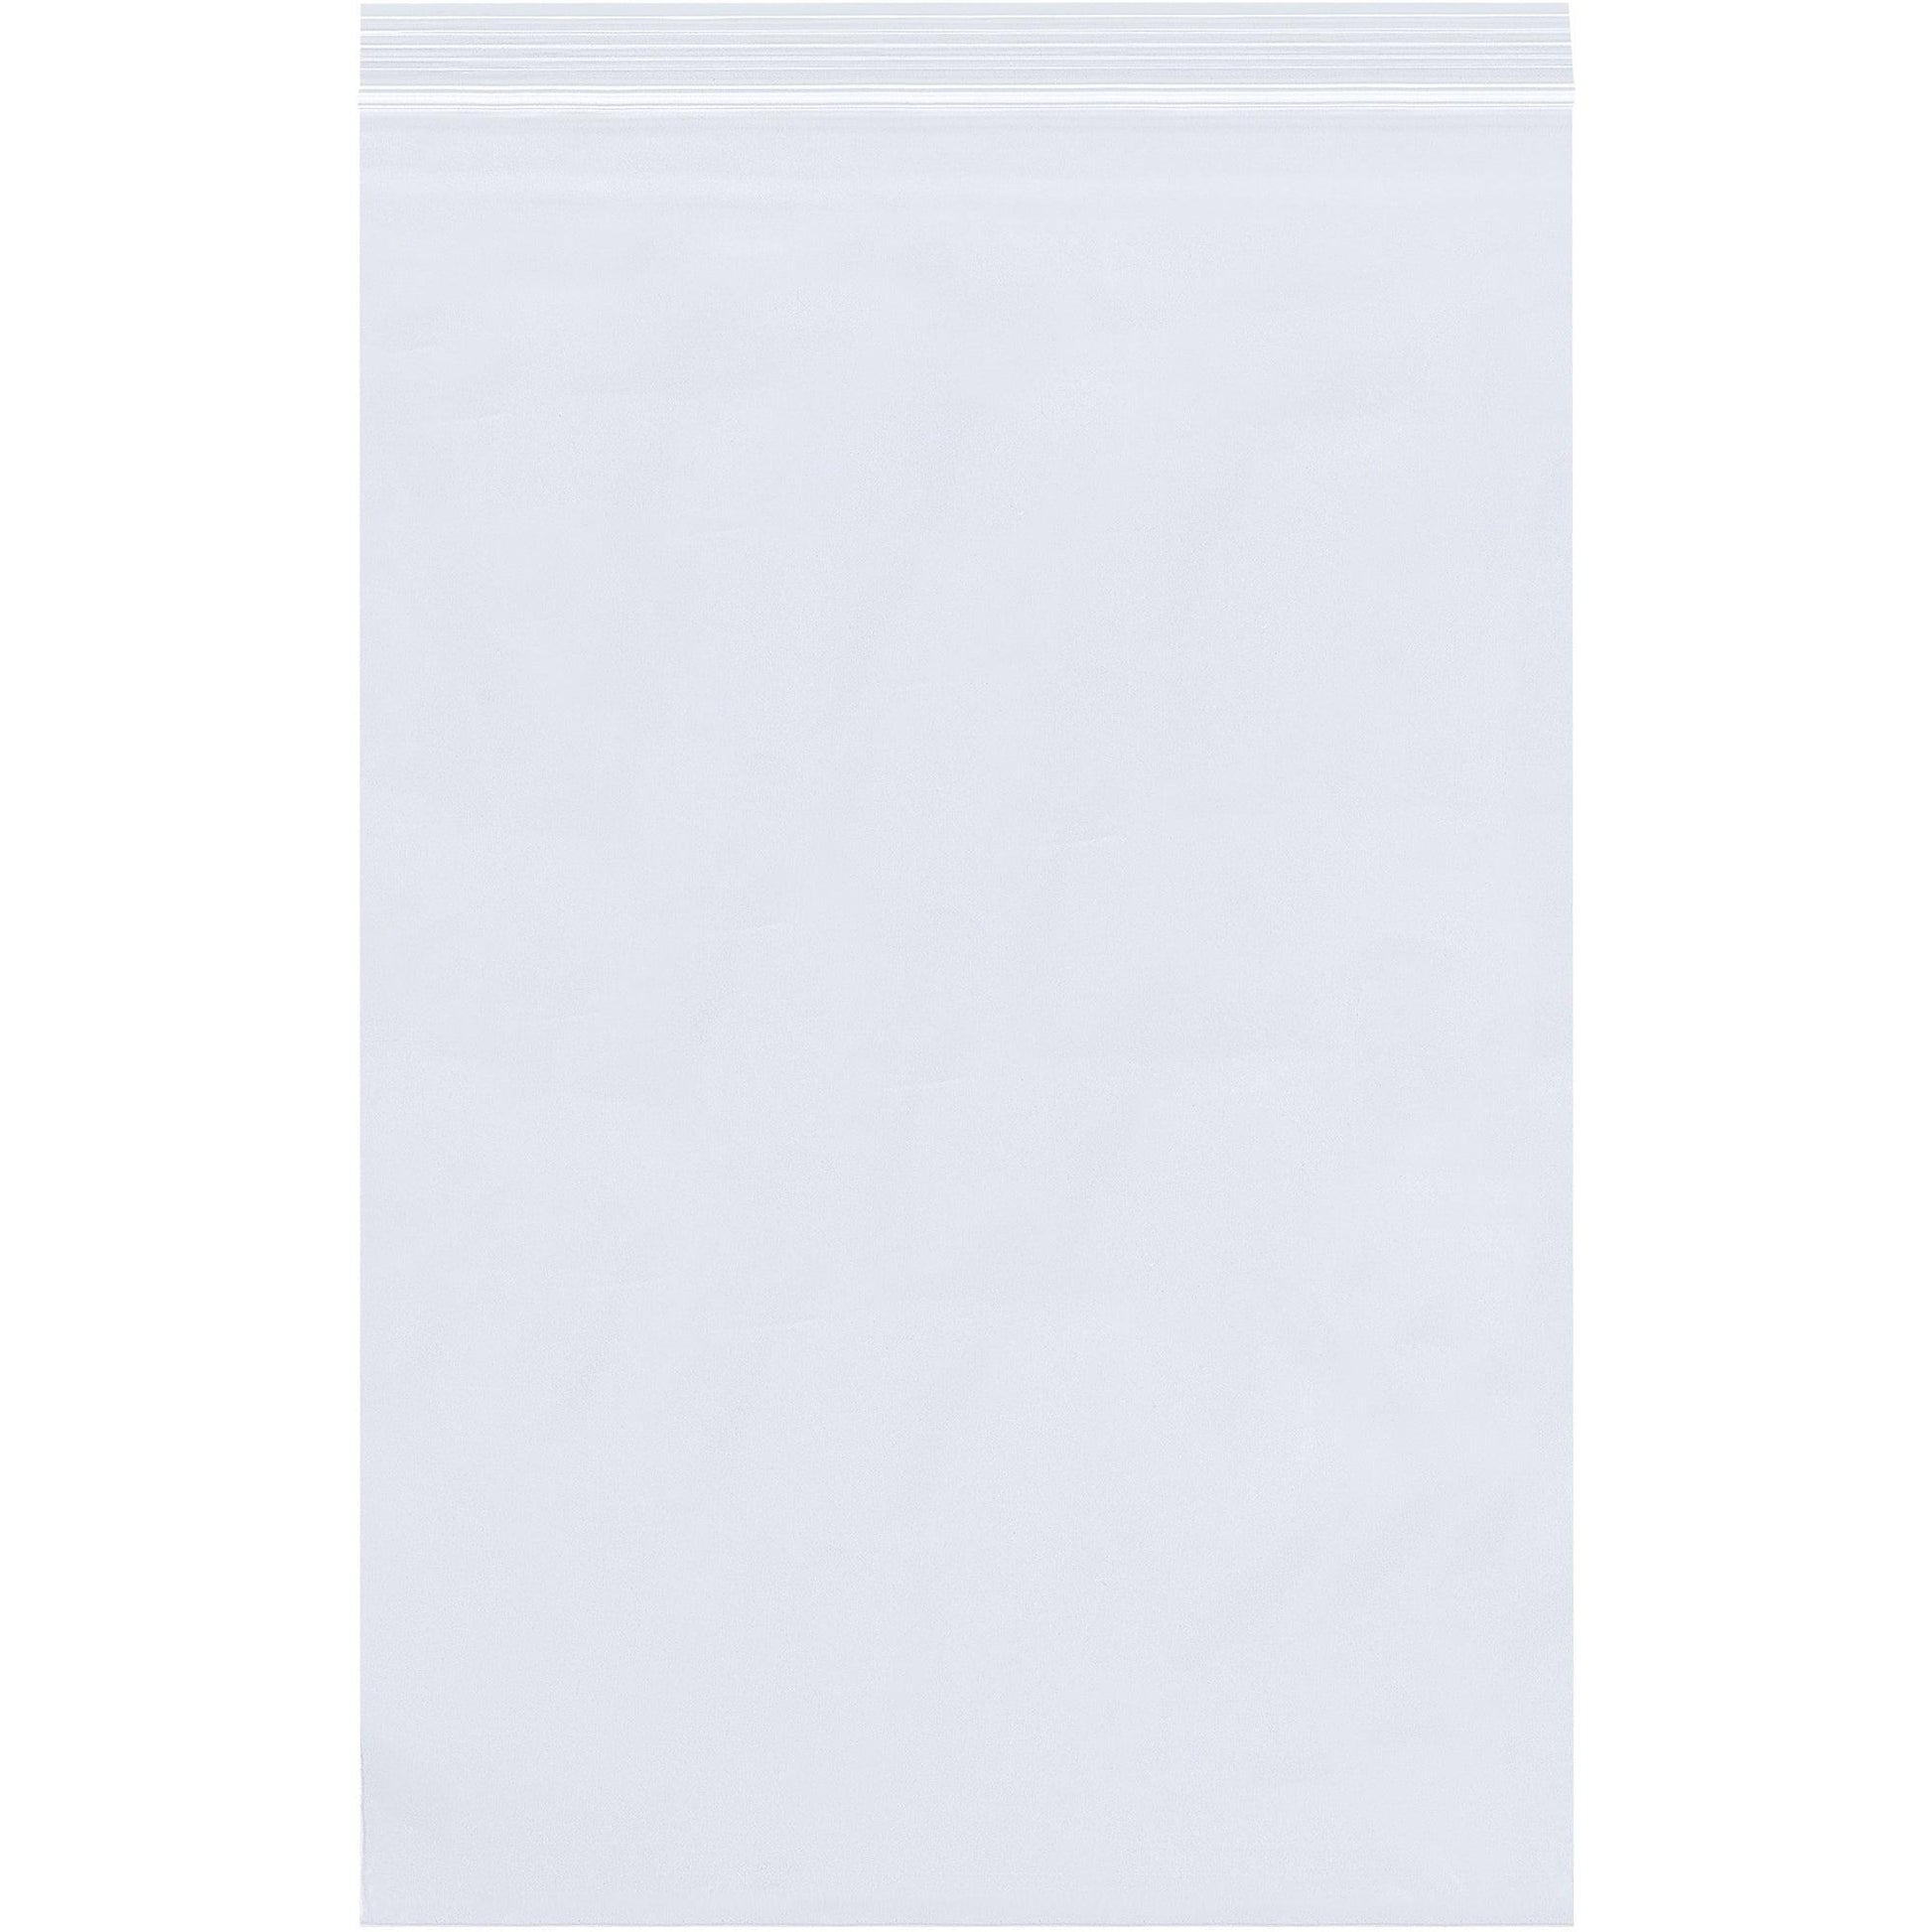 12 x 14" - 2 Mil Reclosable Poly Bags - PB3667